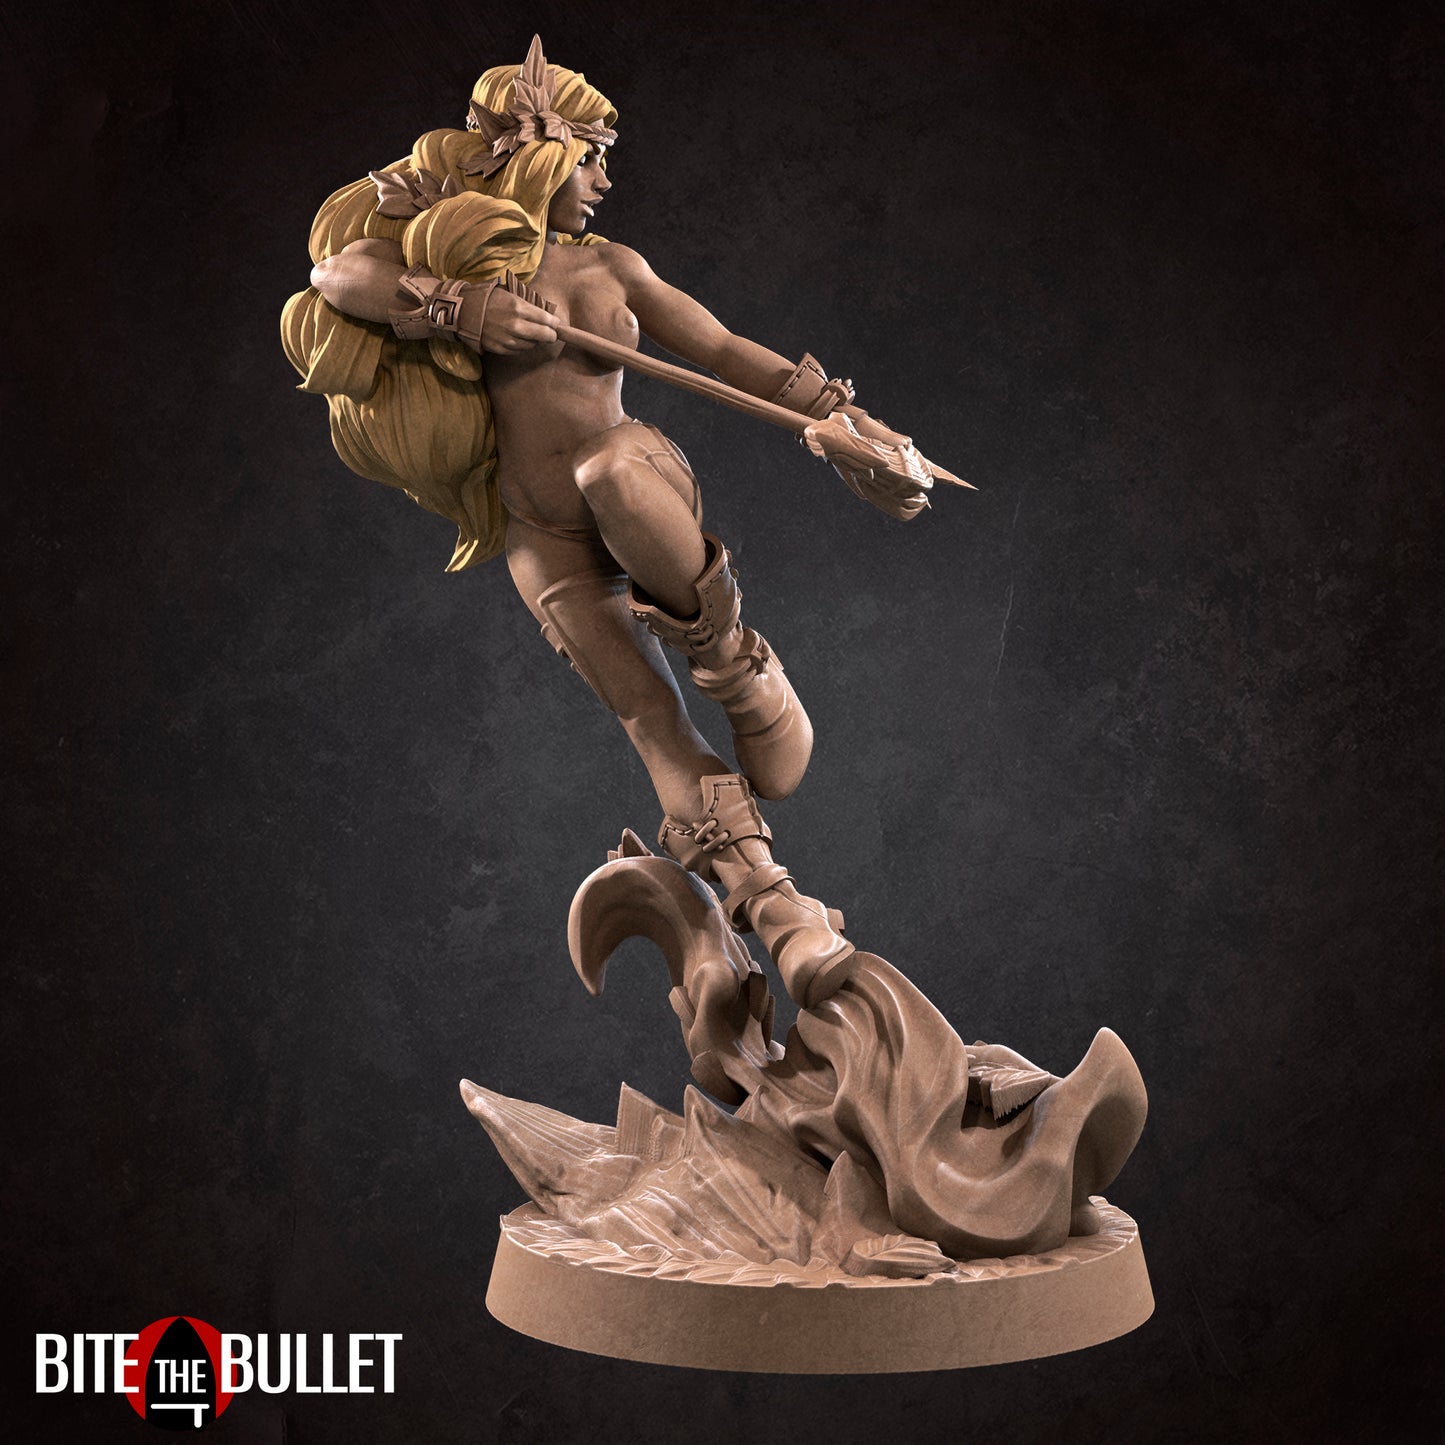 Lenore, Pinup SFW NSFW Lovely Elf Woman, Curly-Haired Amazon with Bow and Arrow | D&D Miniature Pinup | Bite the Bullet - Tattles Told 3D